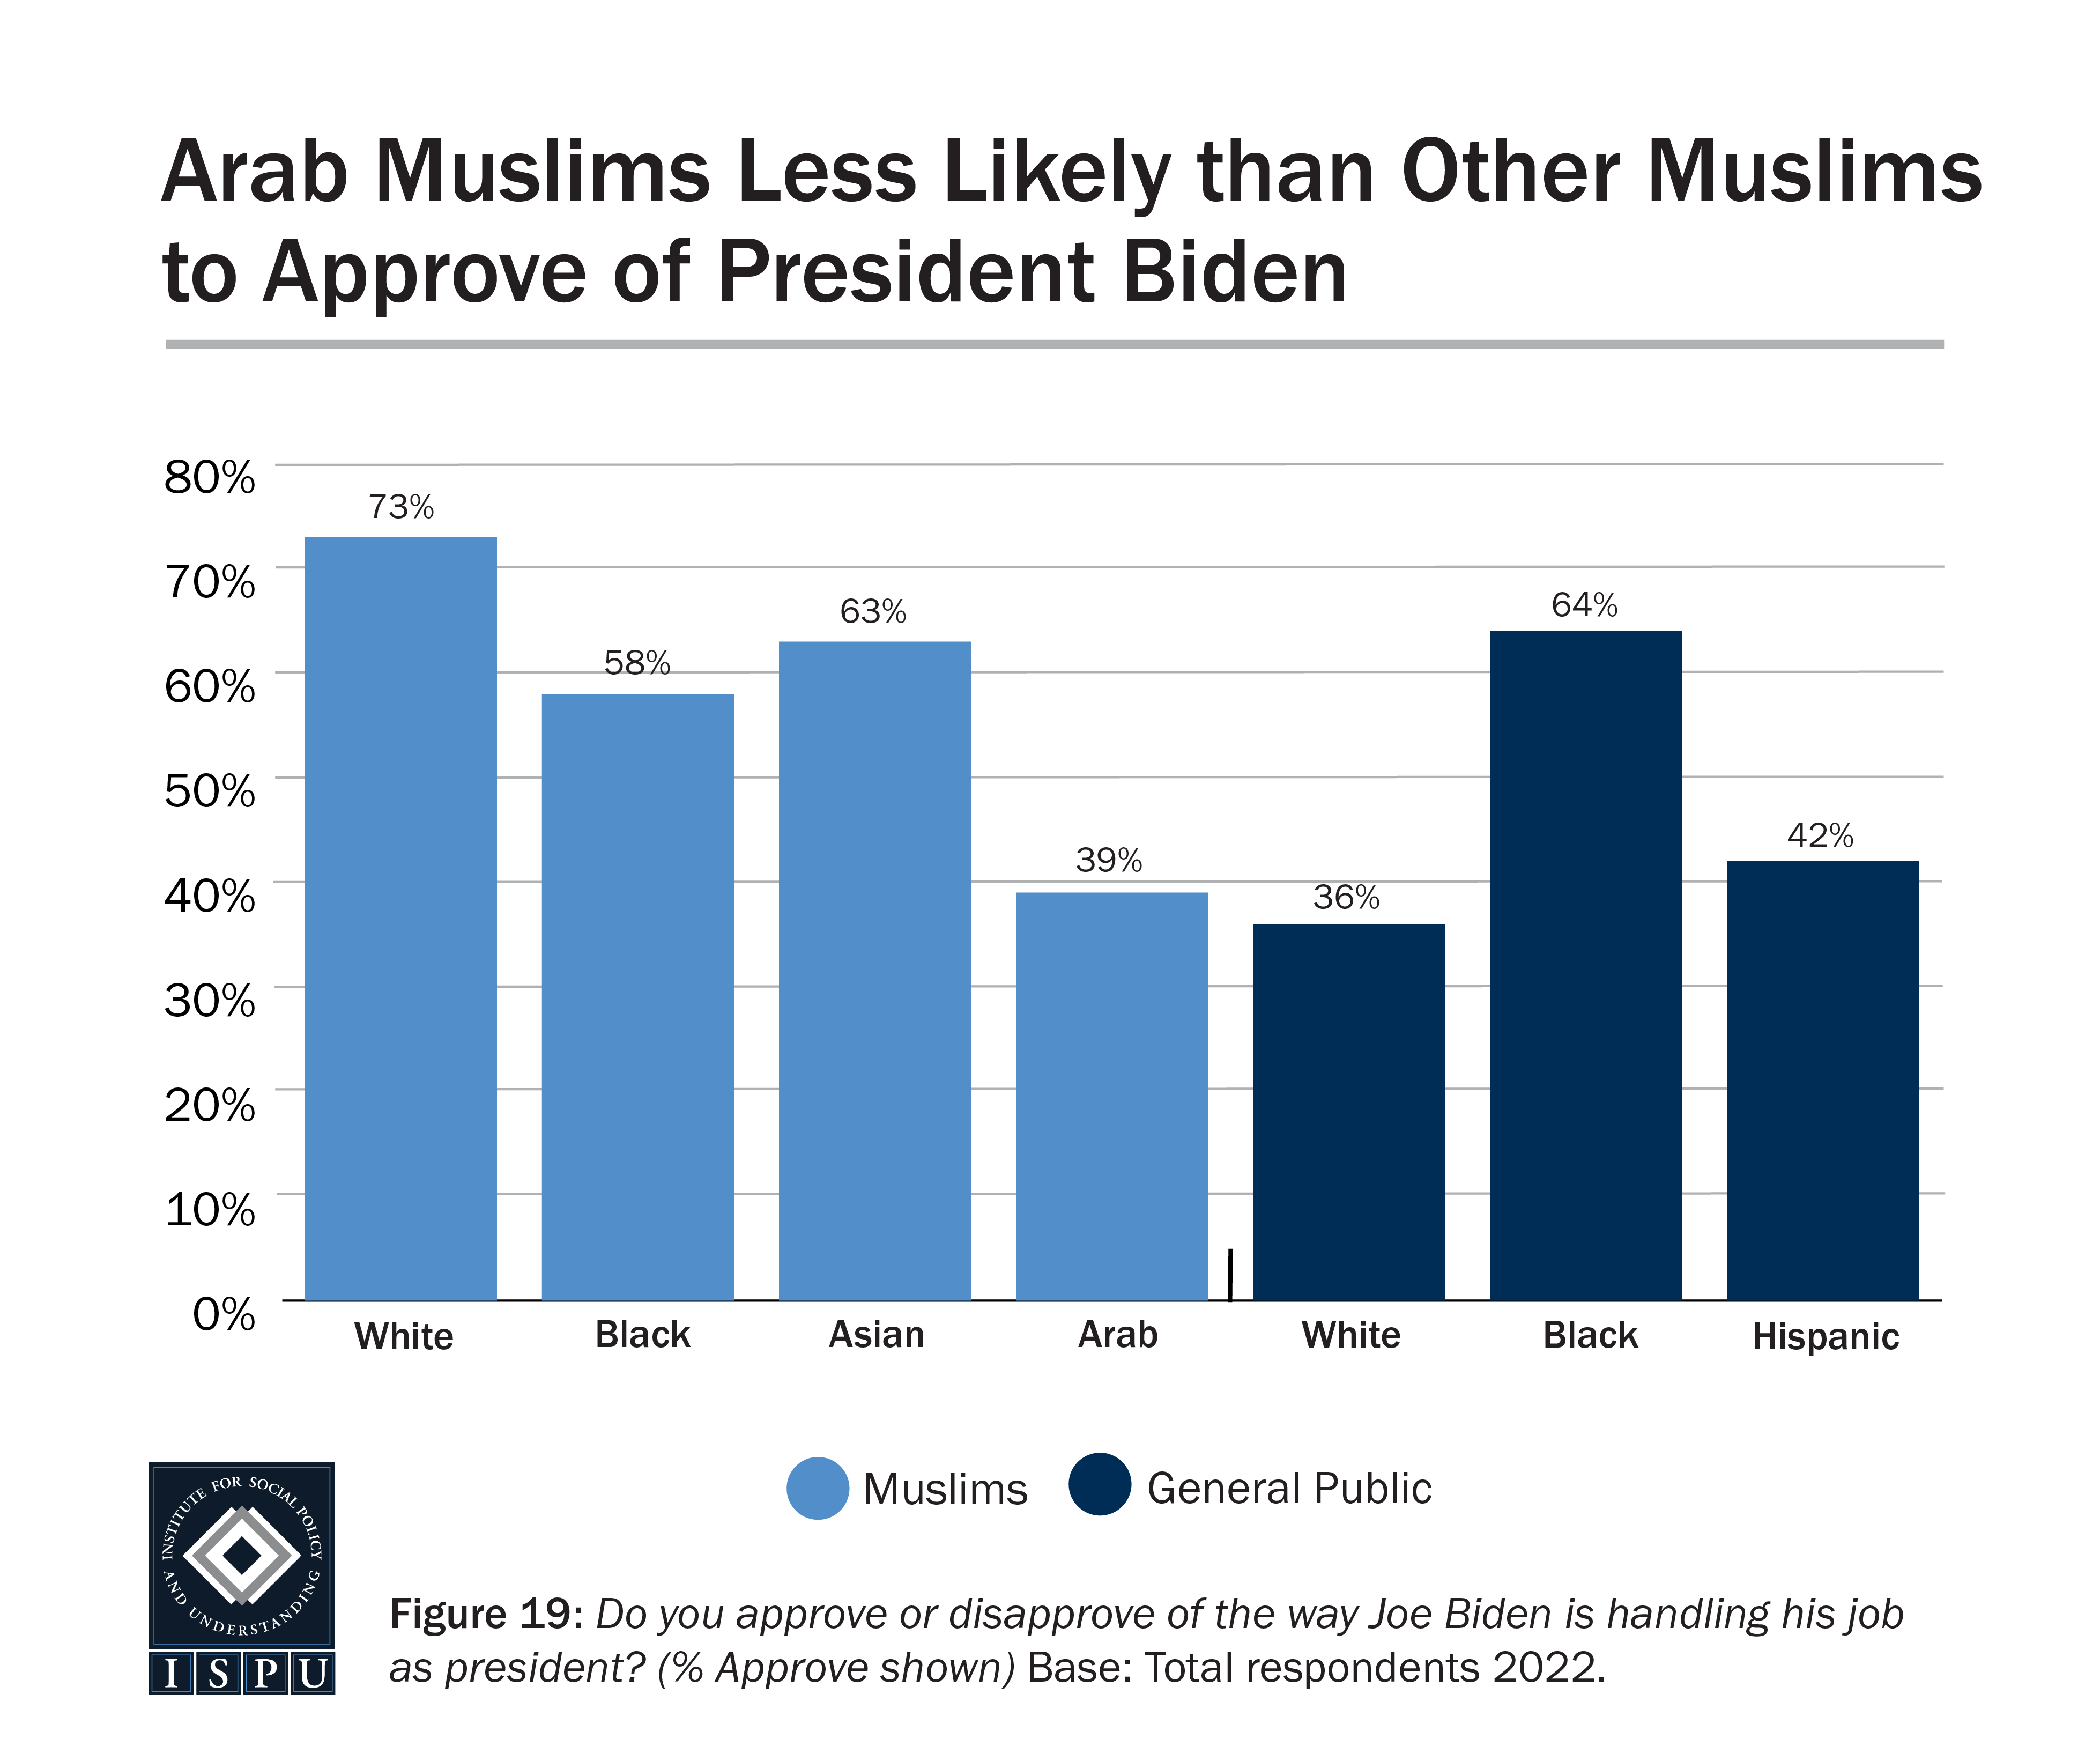 A bar graph showing the proportion of racial/ethnic groups among Muslims and general public who approve of President Biden’s job performance.